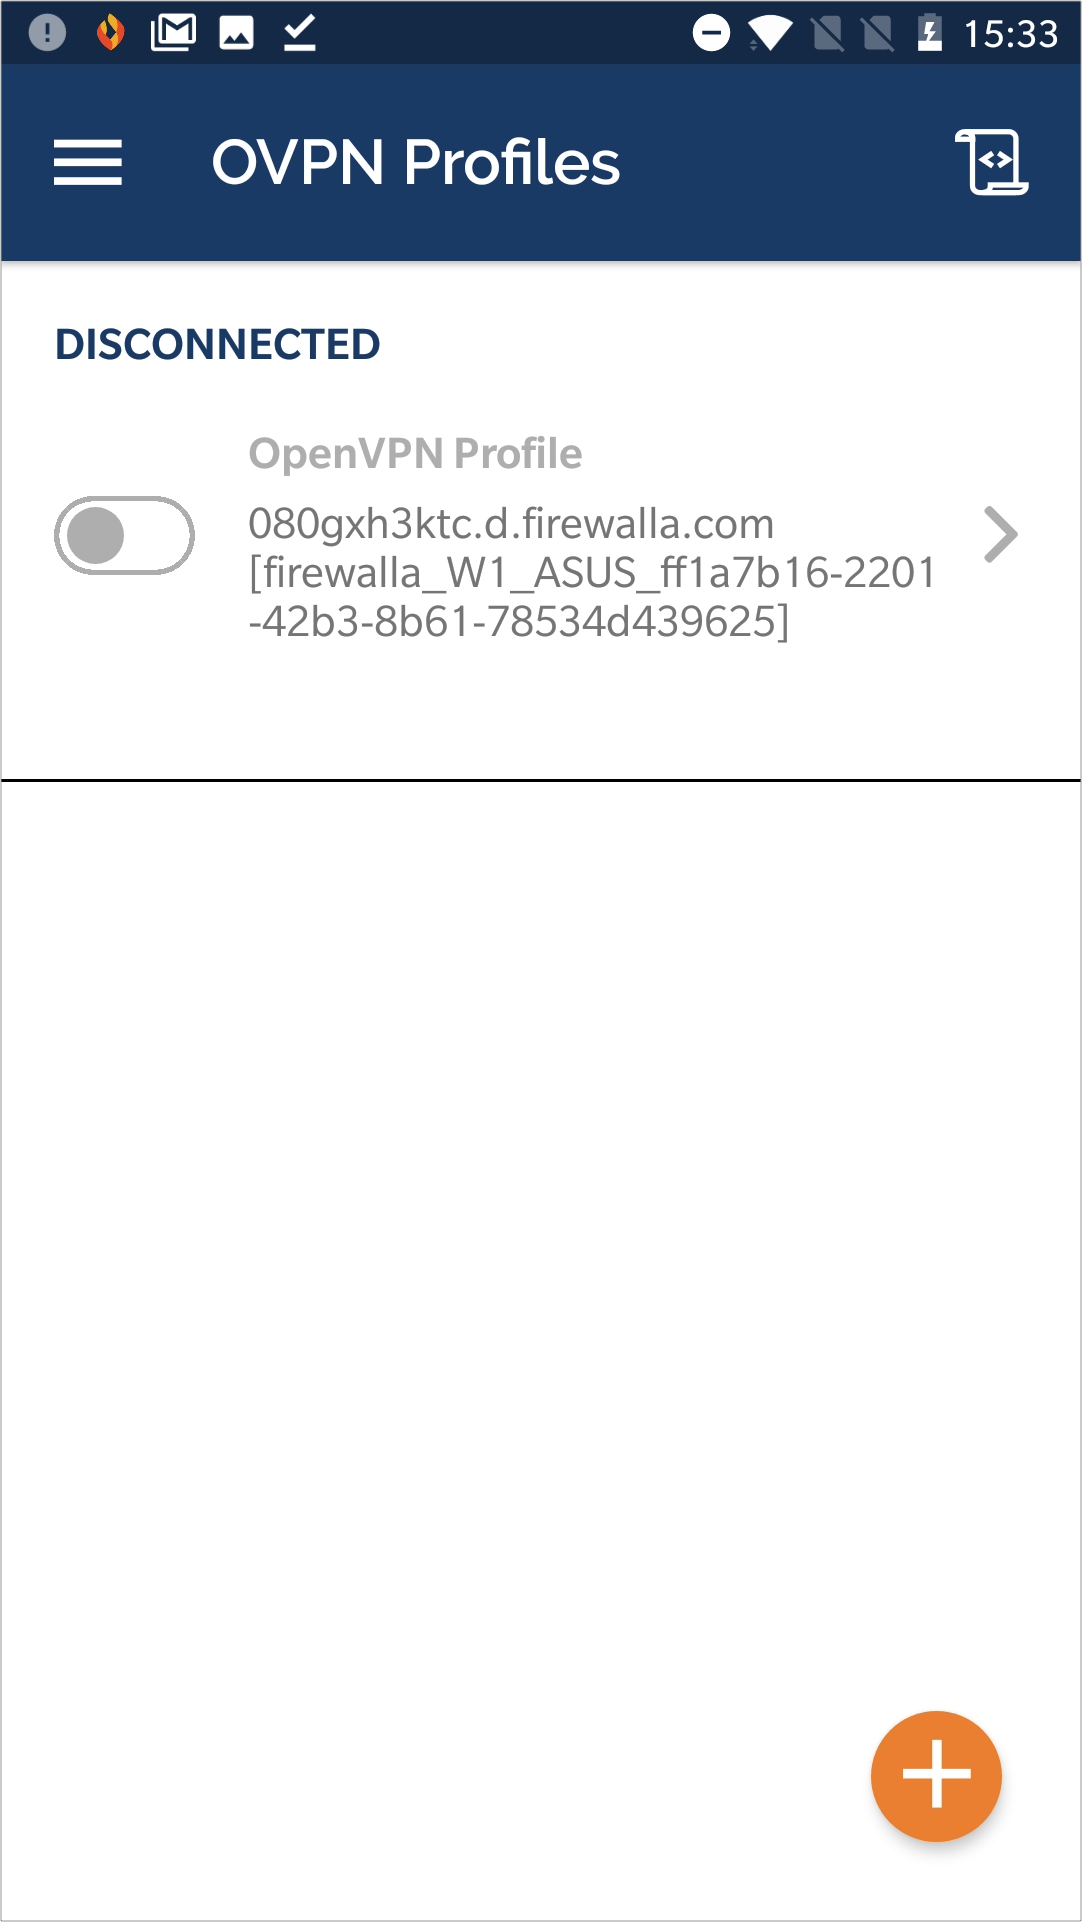 Android VPN client 'ON/OFF' toggle for OpenVPN profile